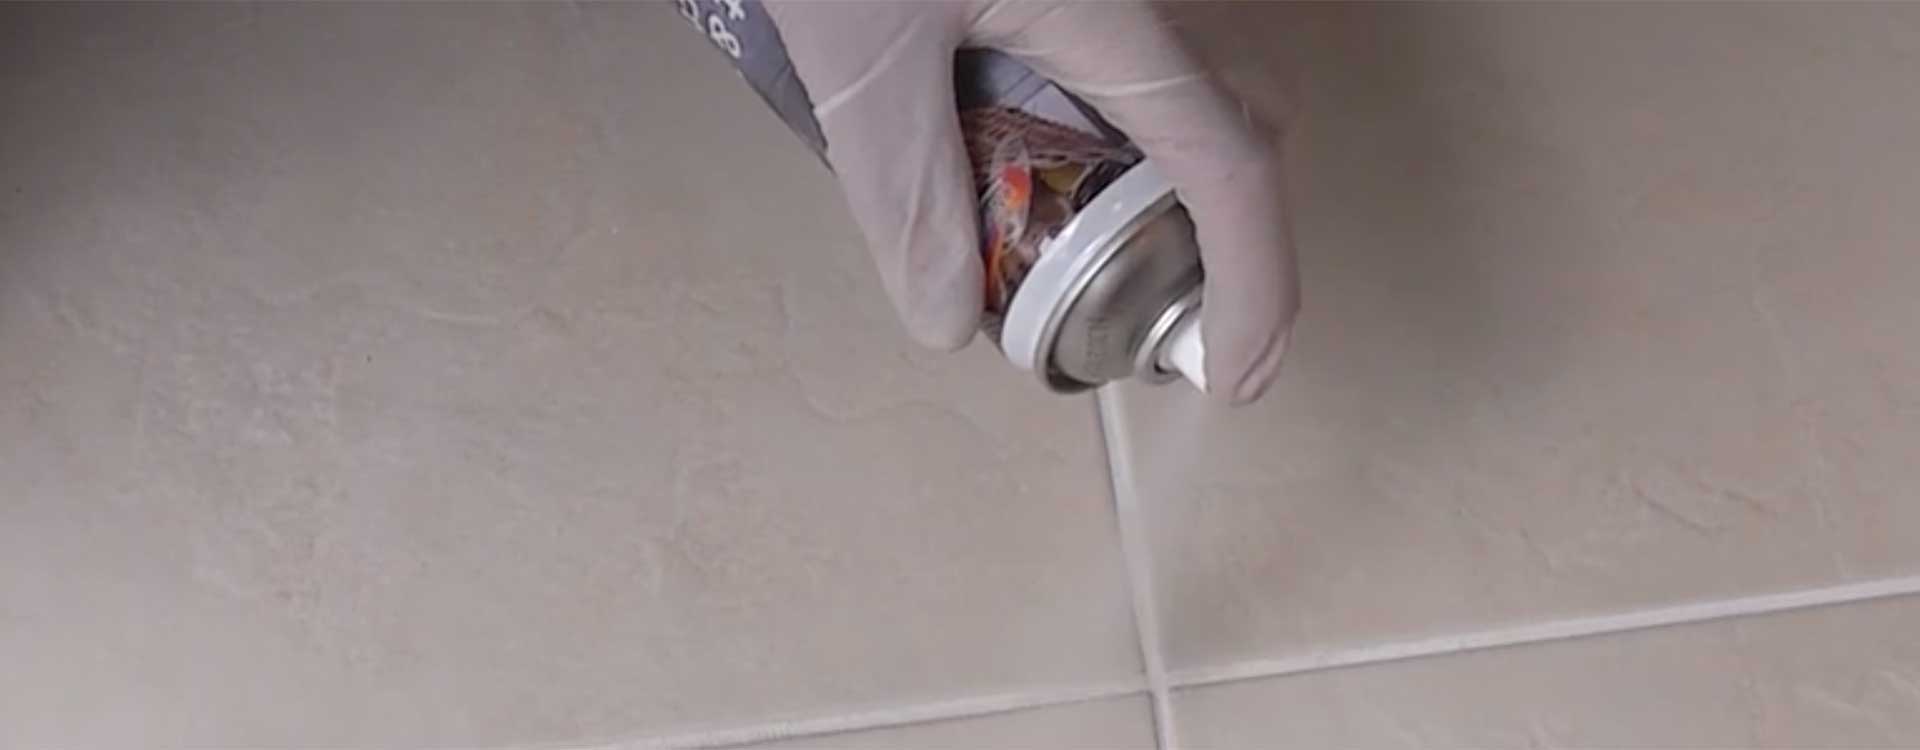 How Long Does Grout Sealer Take To Dry, How To Remove Grout Sealer From Tile